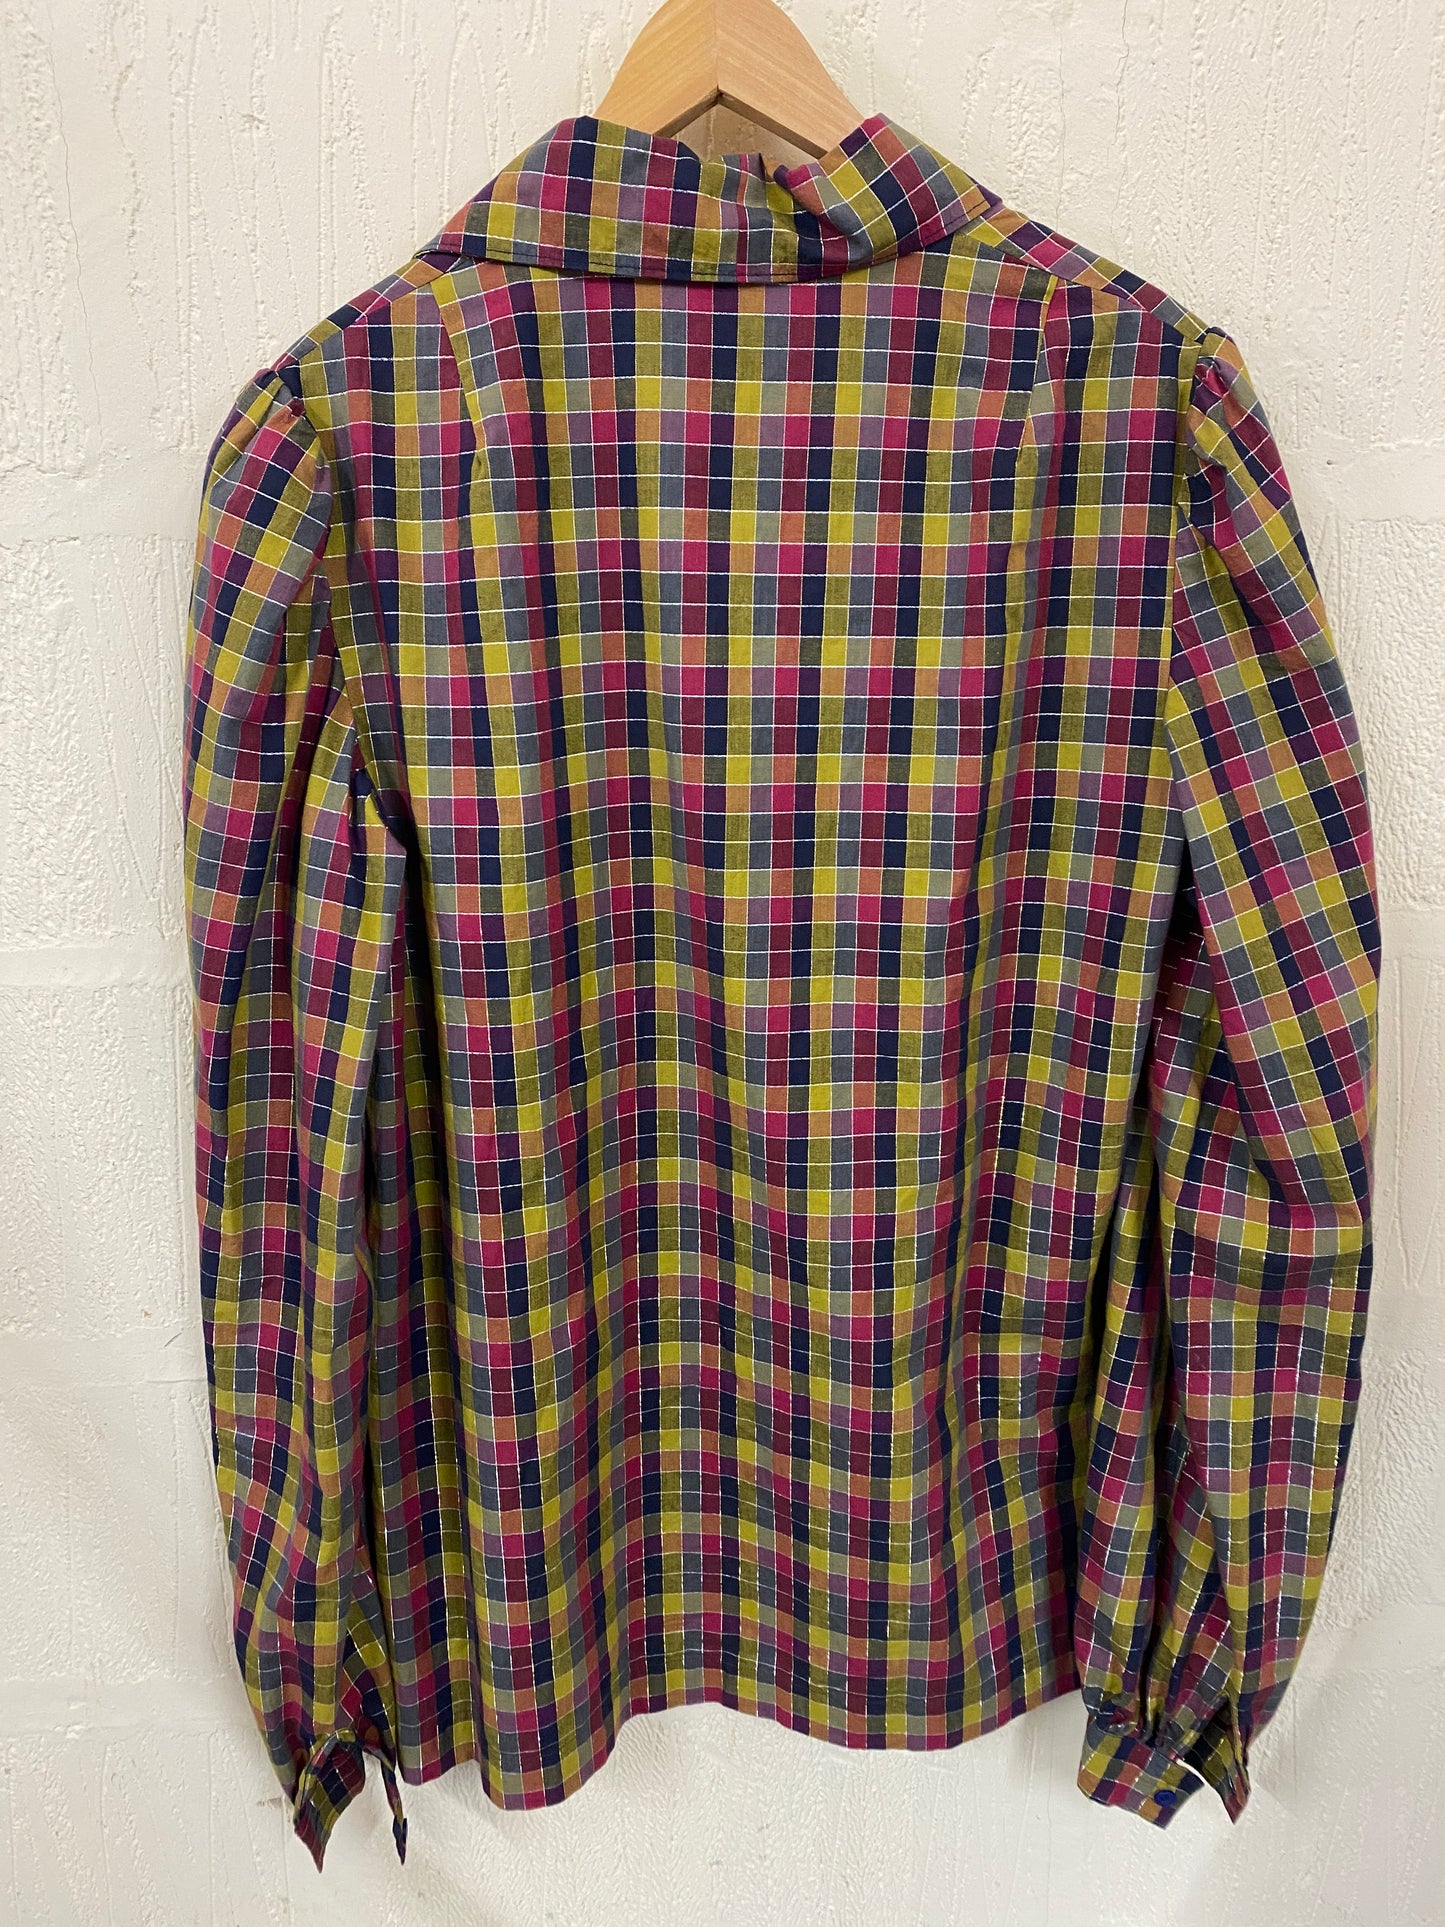 Hand made Multi Colour Check with Silver Thread Shacket Blouse.  Size 14